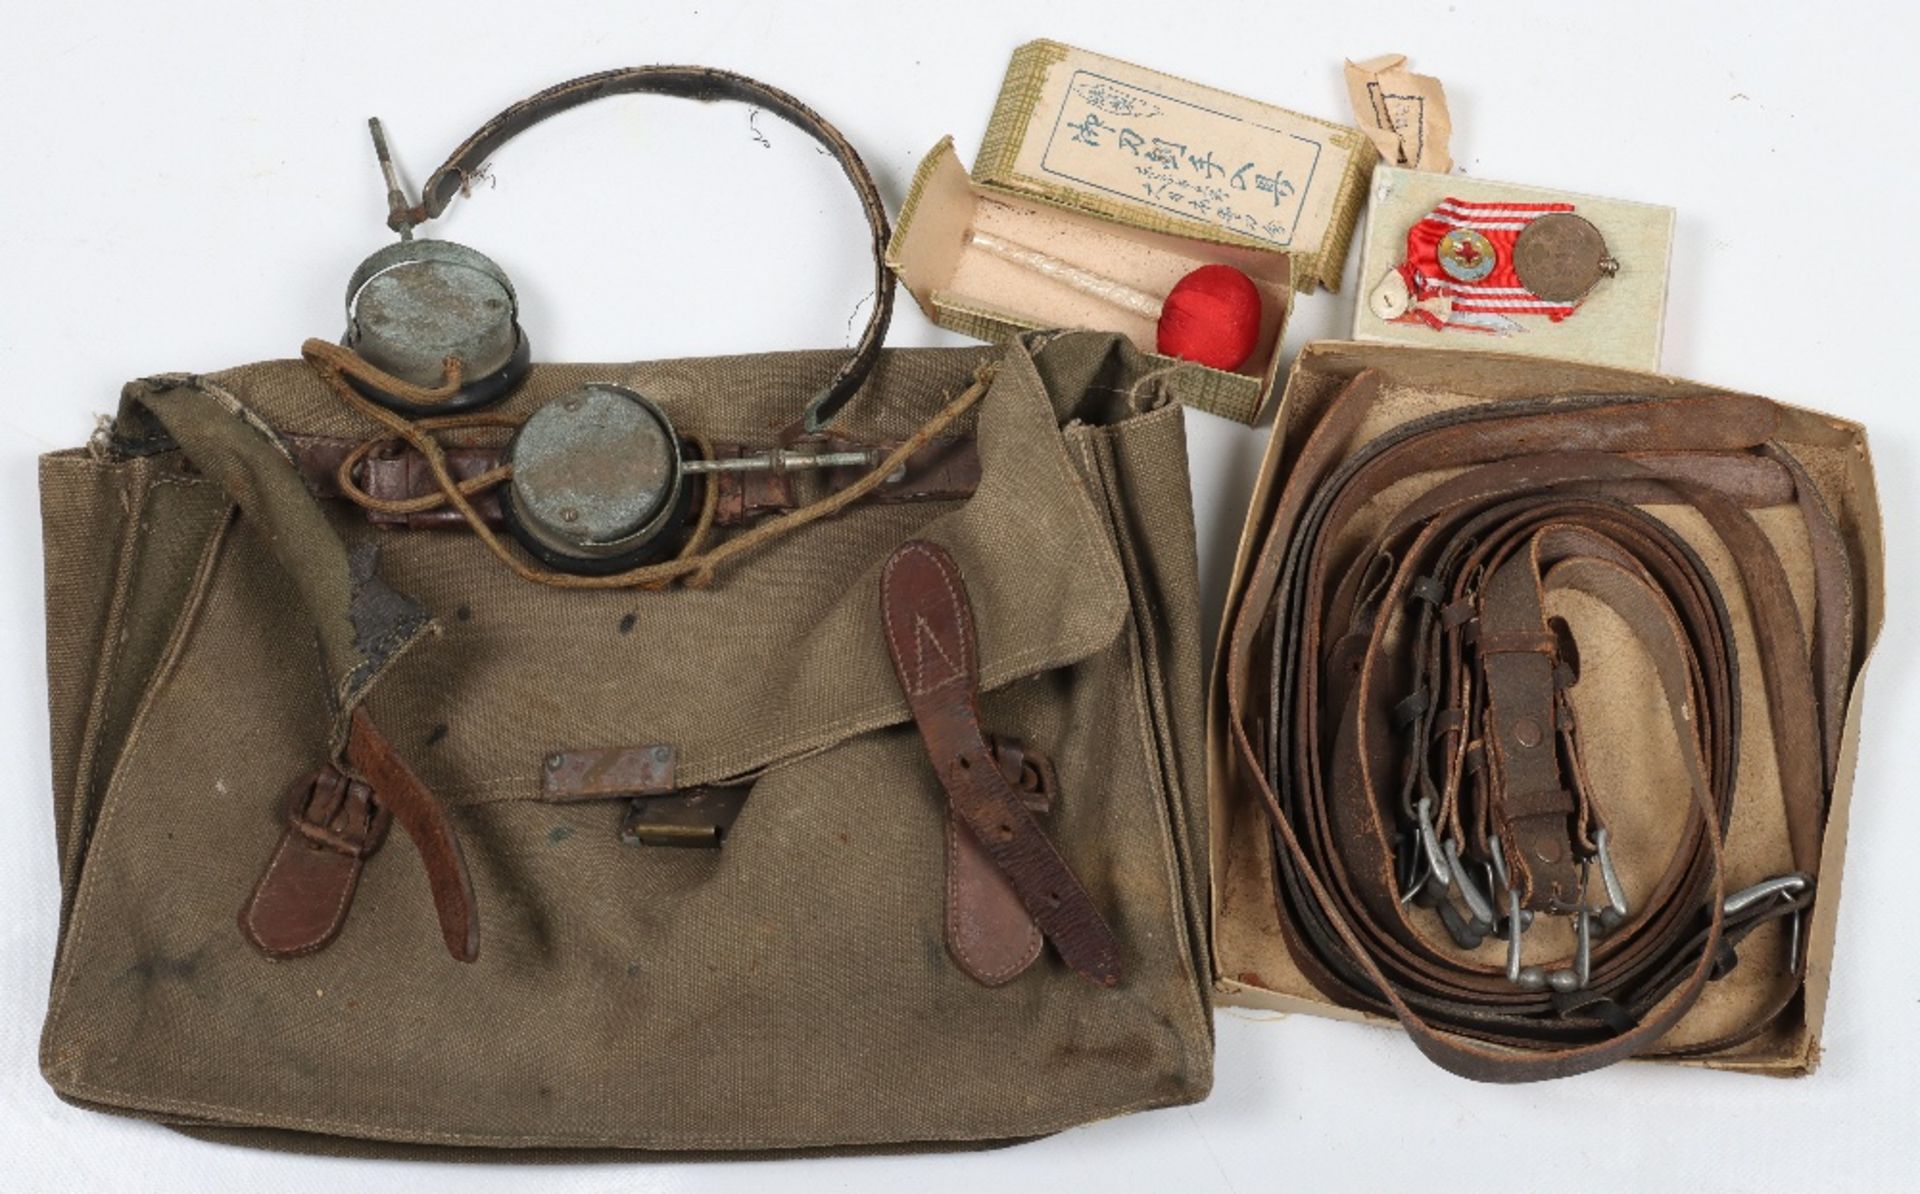 WW2 Japanese Army Pilots Uniform Group in Storage Case - Image 26 of 32